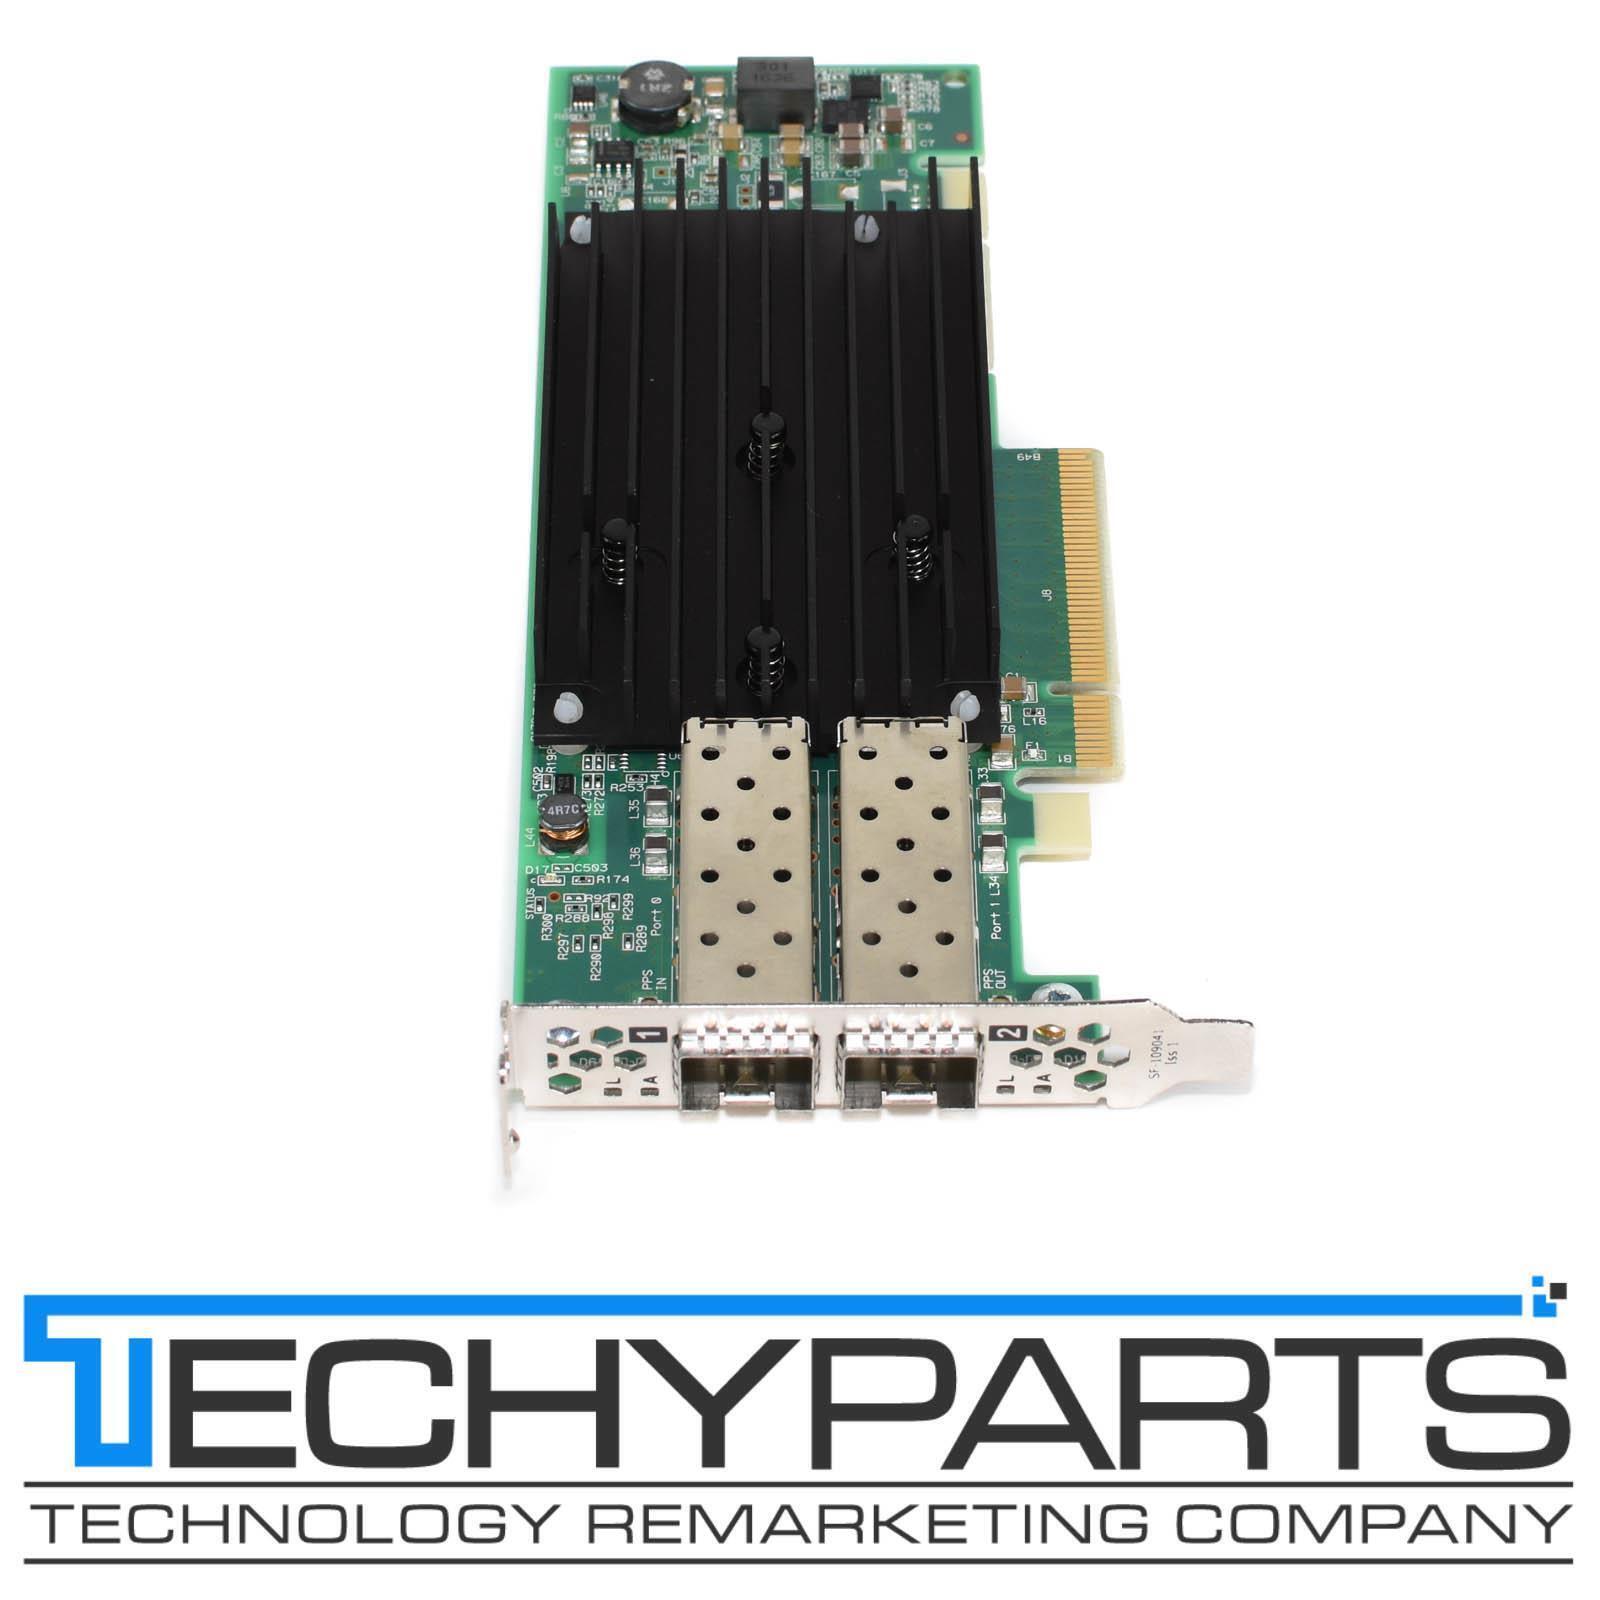 SolarFlare SFN8522 Onload 2-Port 10Gb/s PCIe 3.1 x8 Ethernet Adapter NIC SFF